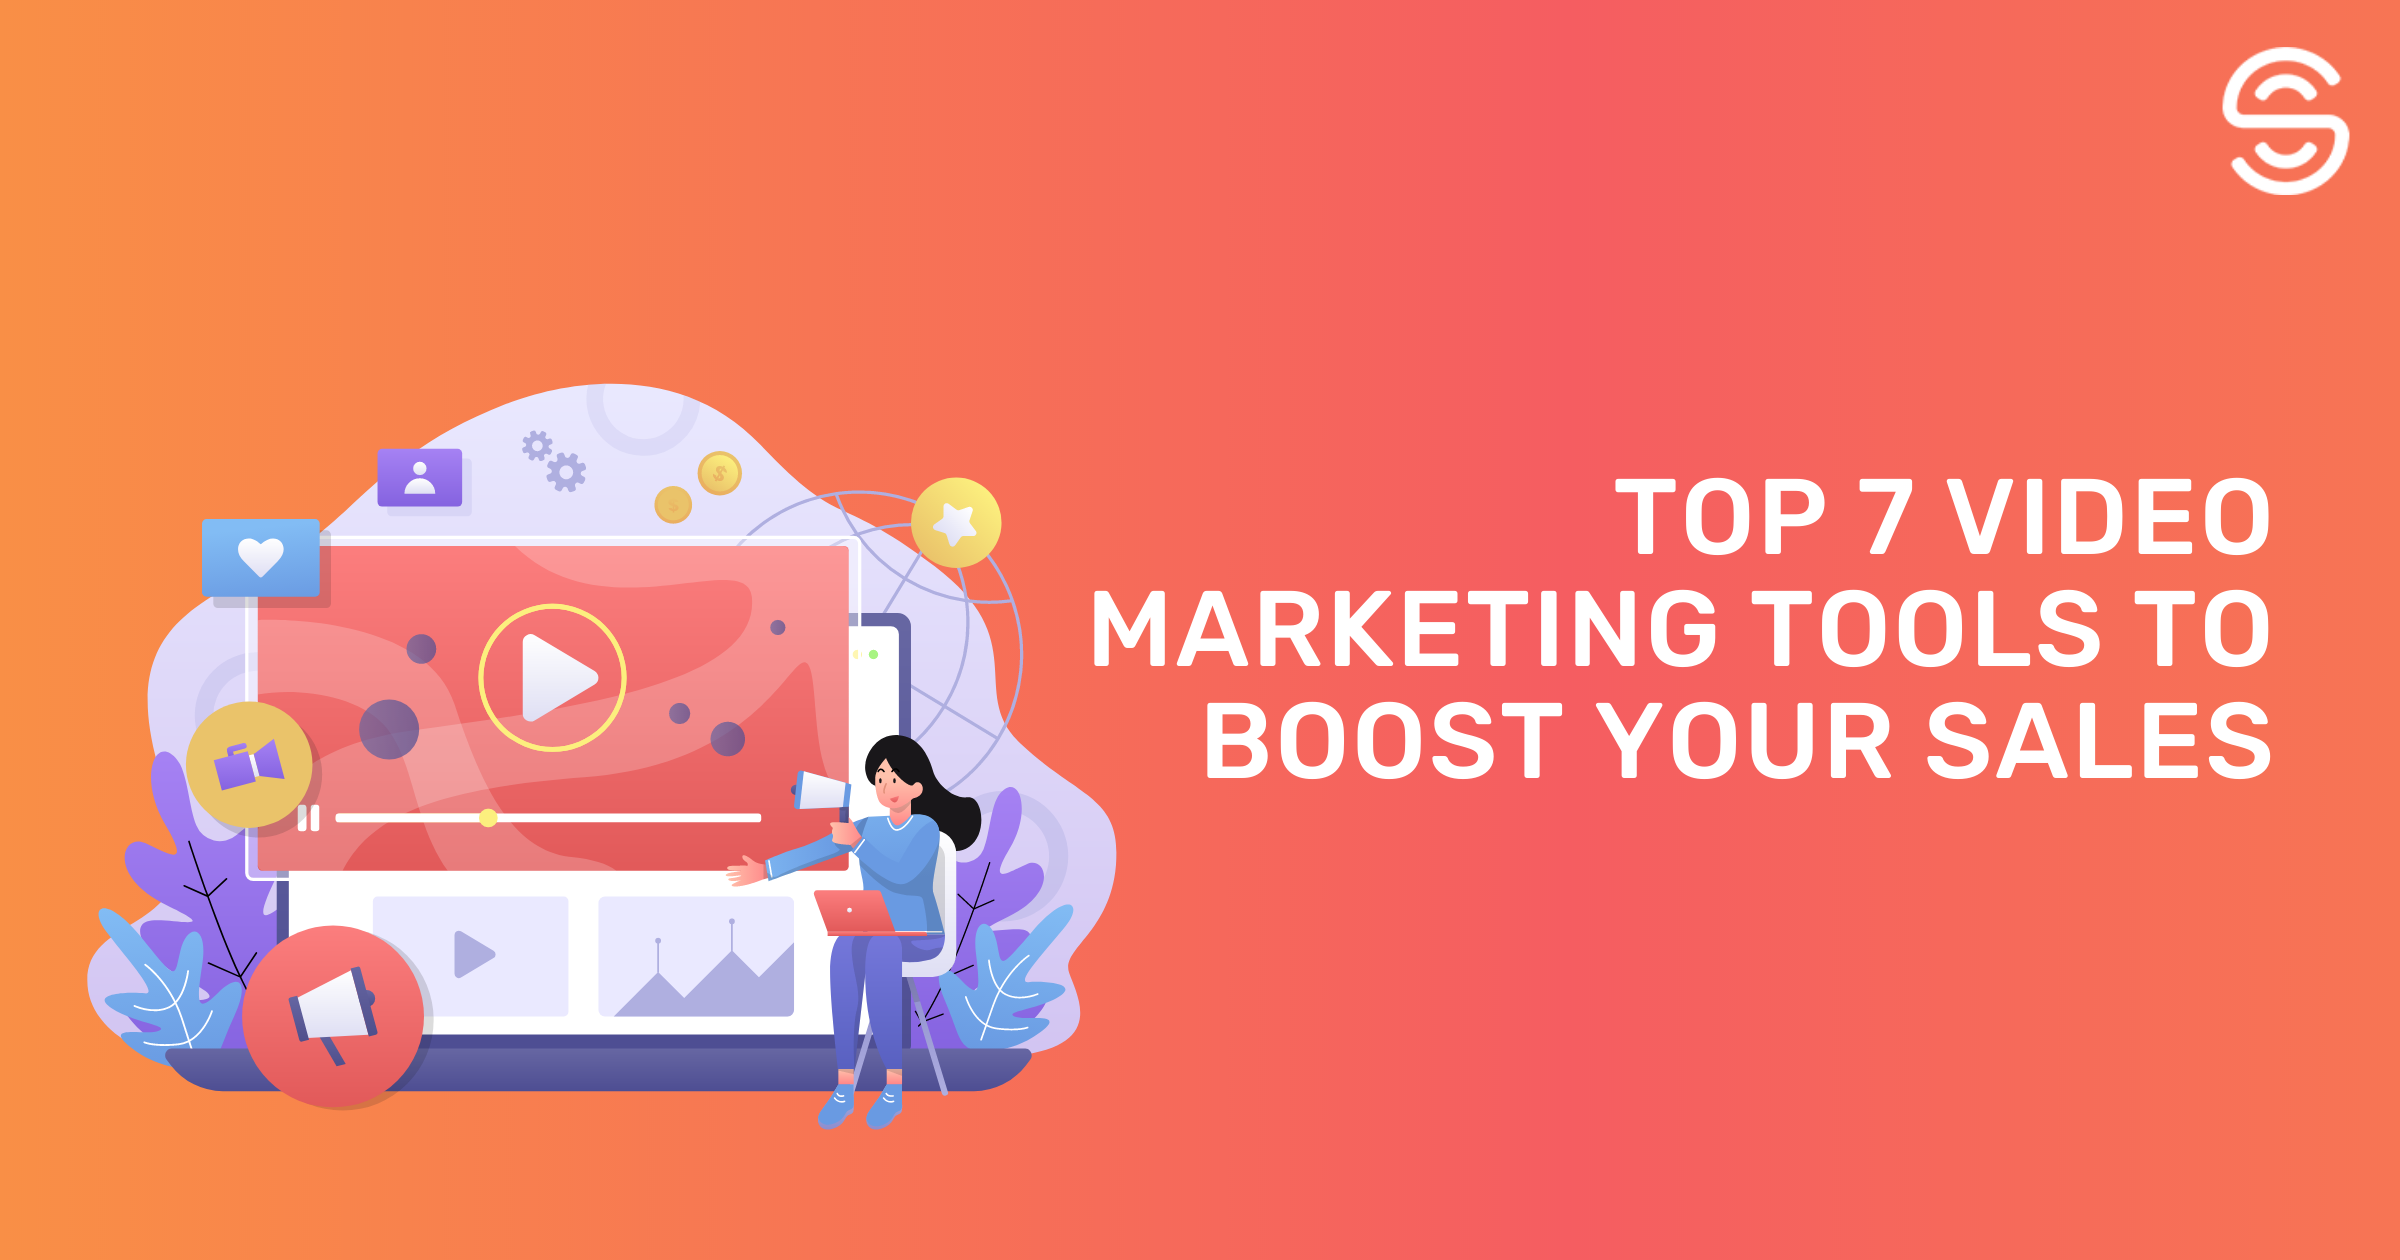 Top 5 Video Marketing Tools to Boost Your Sales - Signum.ai